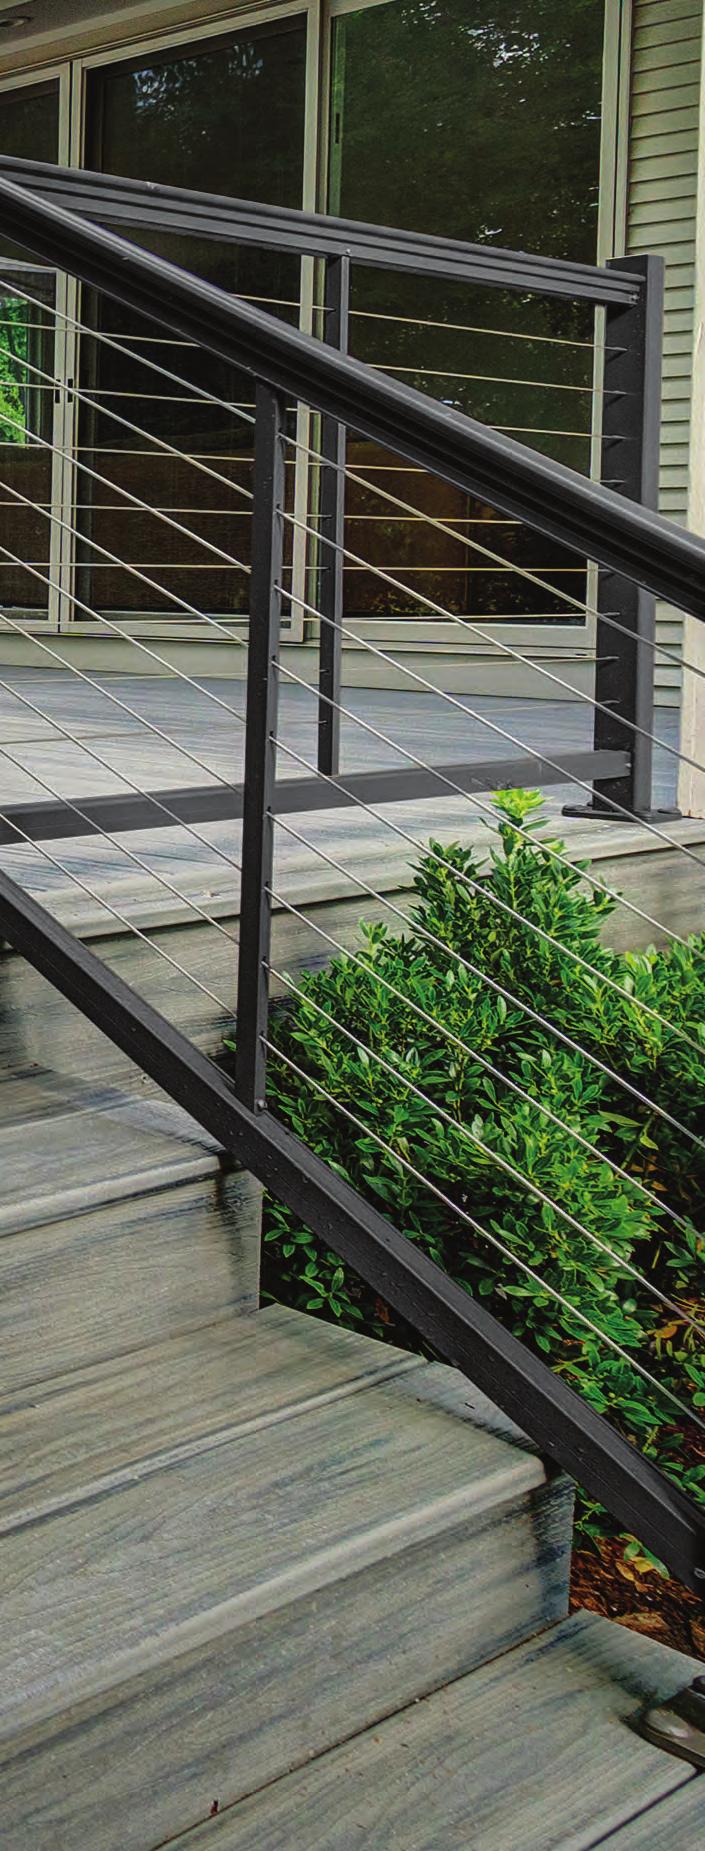 Creating your railing is easy! Install Posts Assemble & Attach Rail Kits Install CableRail Kits Overview Learn how the kits fit together to create a complete railing project.